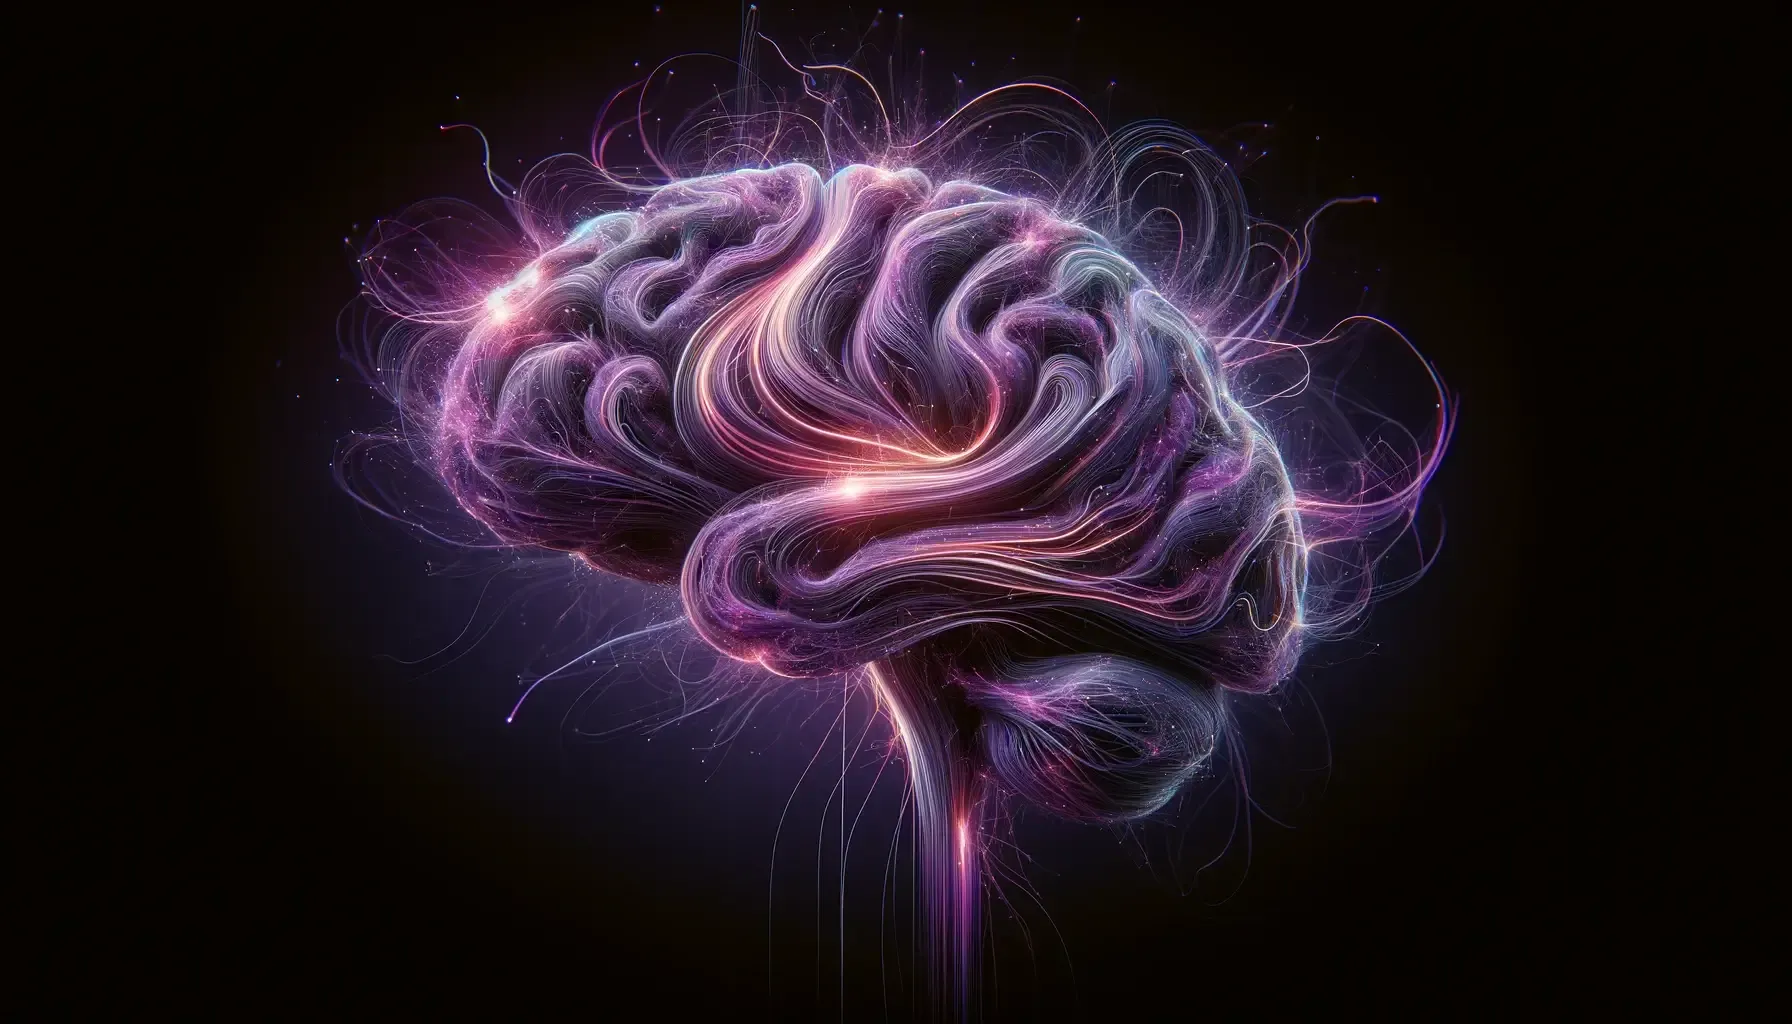 Abstract brain image